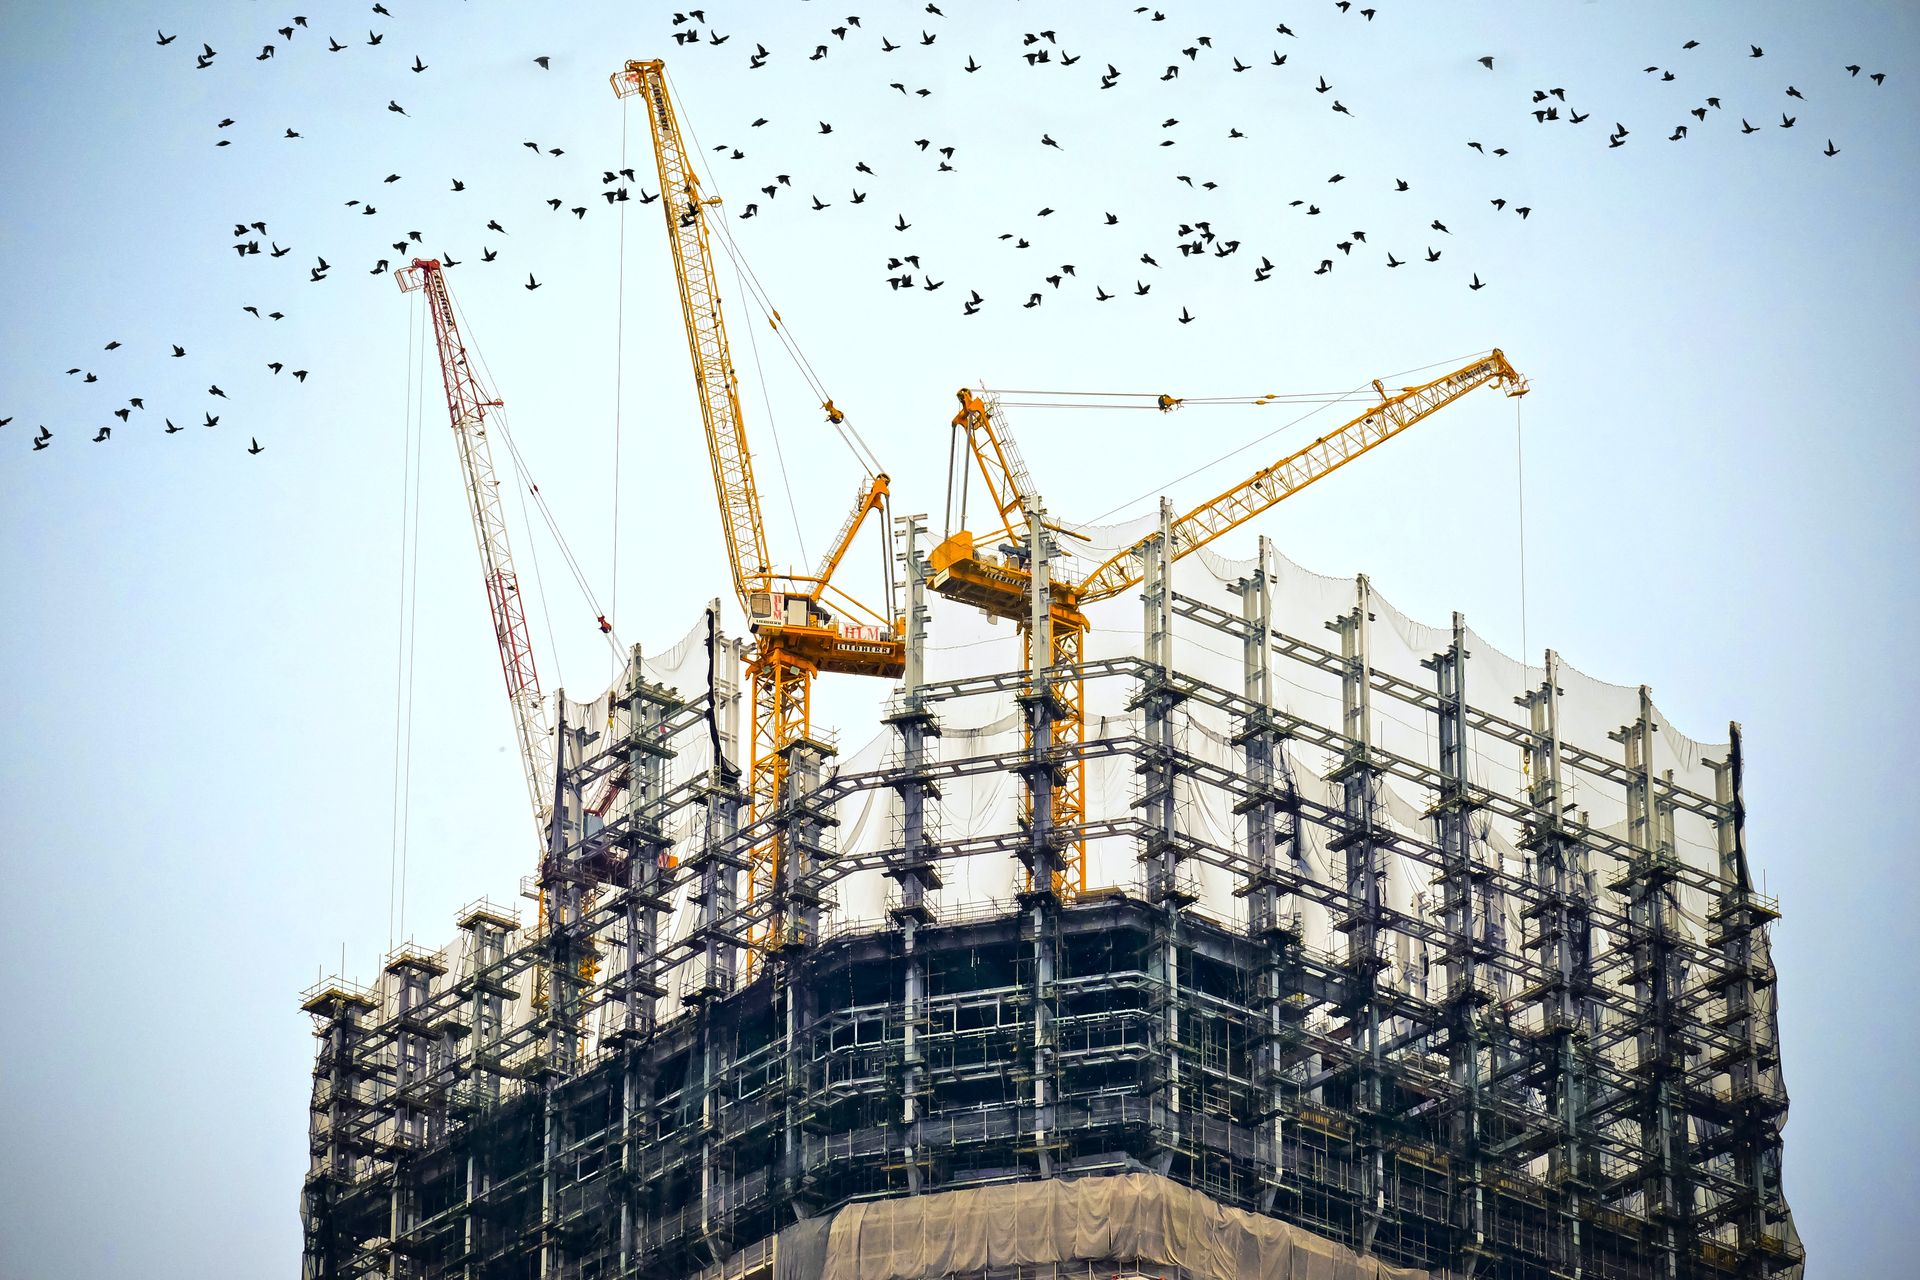 Construction Forging - A constructed building with cranes and flock of birds